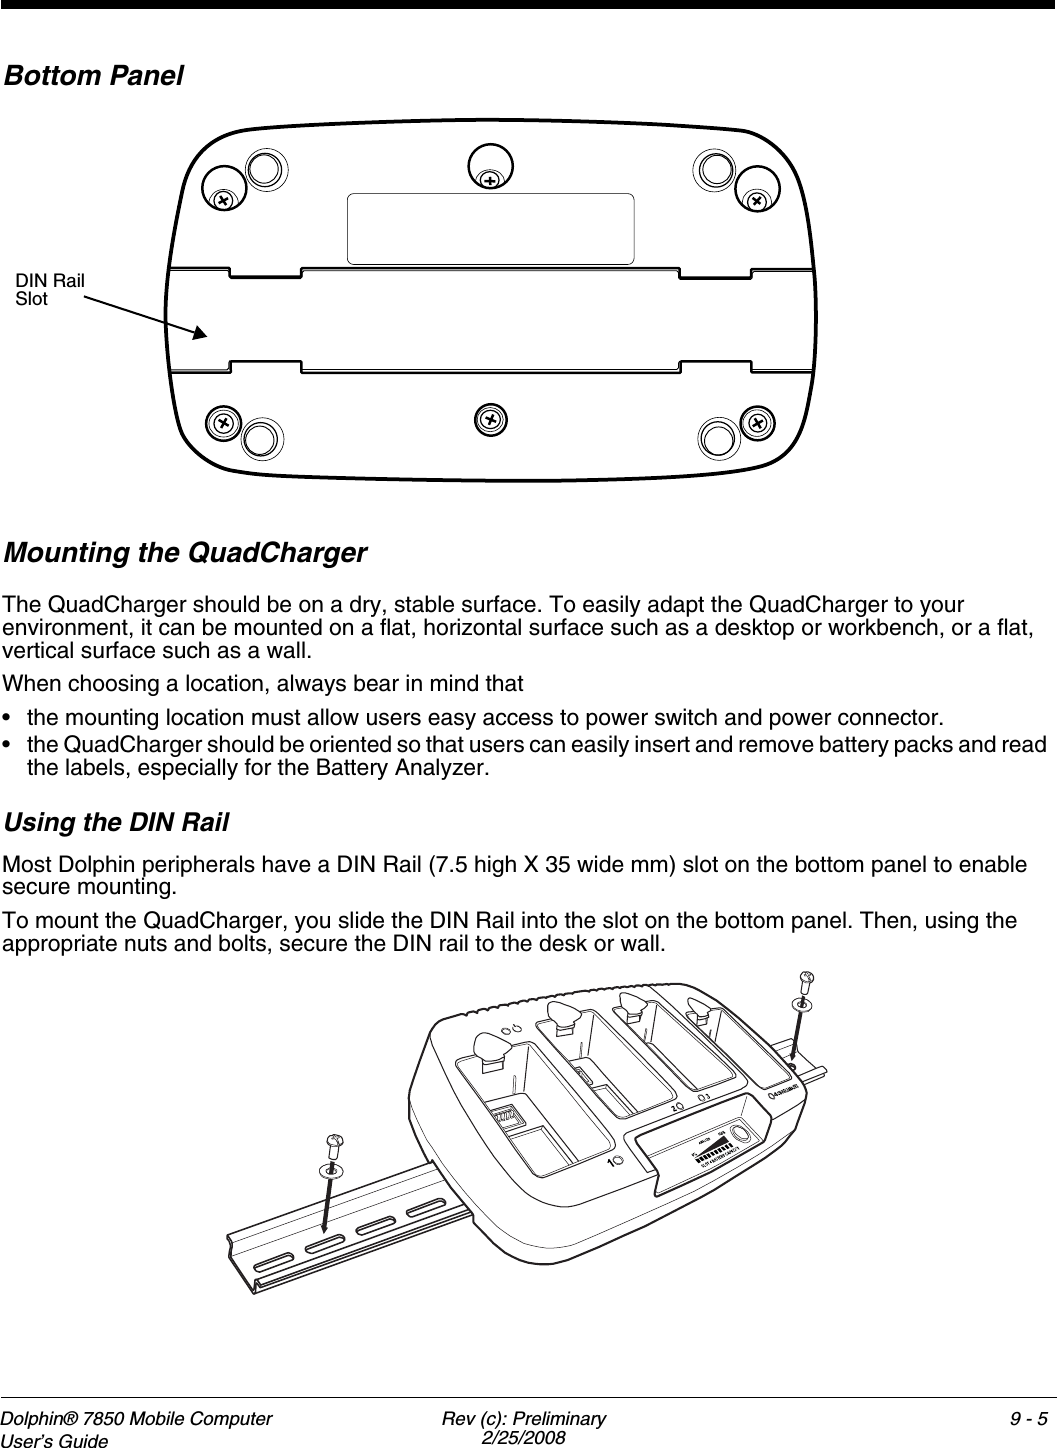 Dolphin® 7850 Mobile Computer  User’s Guide Rev (c): Preliminary2/25/20089 - 5Bottom PanelMounting the QuadChargerThe QuadCharger should be on a dry, stable surface. To easily adapt the QuadCharger to your environment, it can be mounted on a flat, horizontal surface such as a desktop or workbench, or a flat, vertical surface such as a wall. When choosing a location, always bear in mind that • the mounting location must allow users easy access to power switch and power connector.• the QuadCharger should be oriented so that users can easily insert and remove battery packs and read the labels, especially for the Battery Analyzer.Using the DIN RailMost Dolphin peripherals have a DIN Rail (7.5 high X 35 wide mm) slot on the bottom panel to enable secure mounting. To mount the QuadCharger, you slide the DIN Rail into the slot on the bottom panel. Then, using the appropriate nuts and bolts, secure the DIN rail to the desk or wall.        DIN Rail Slot